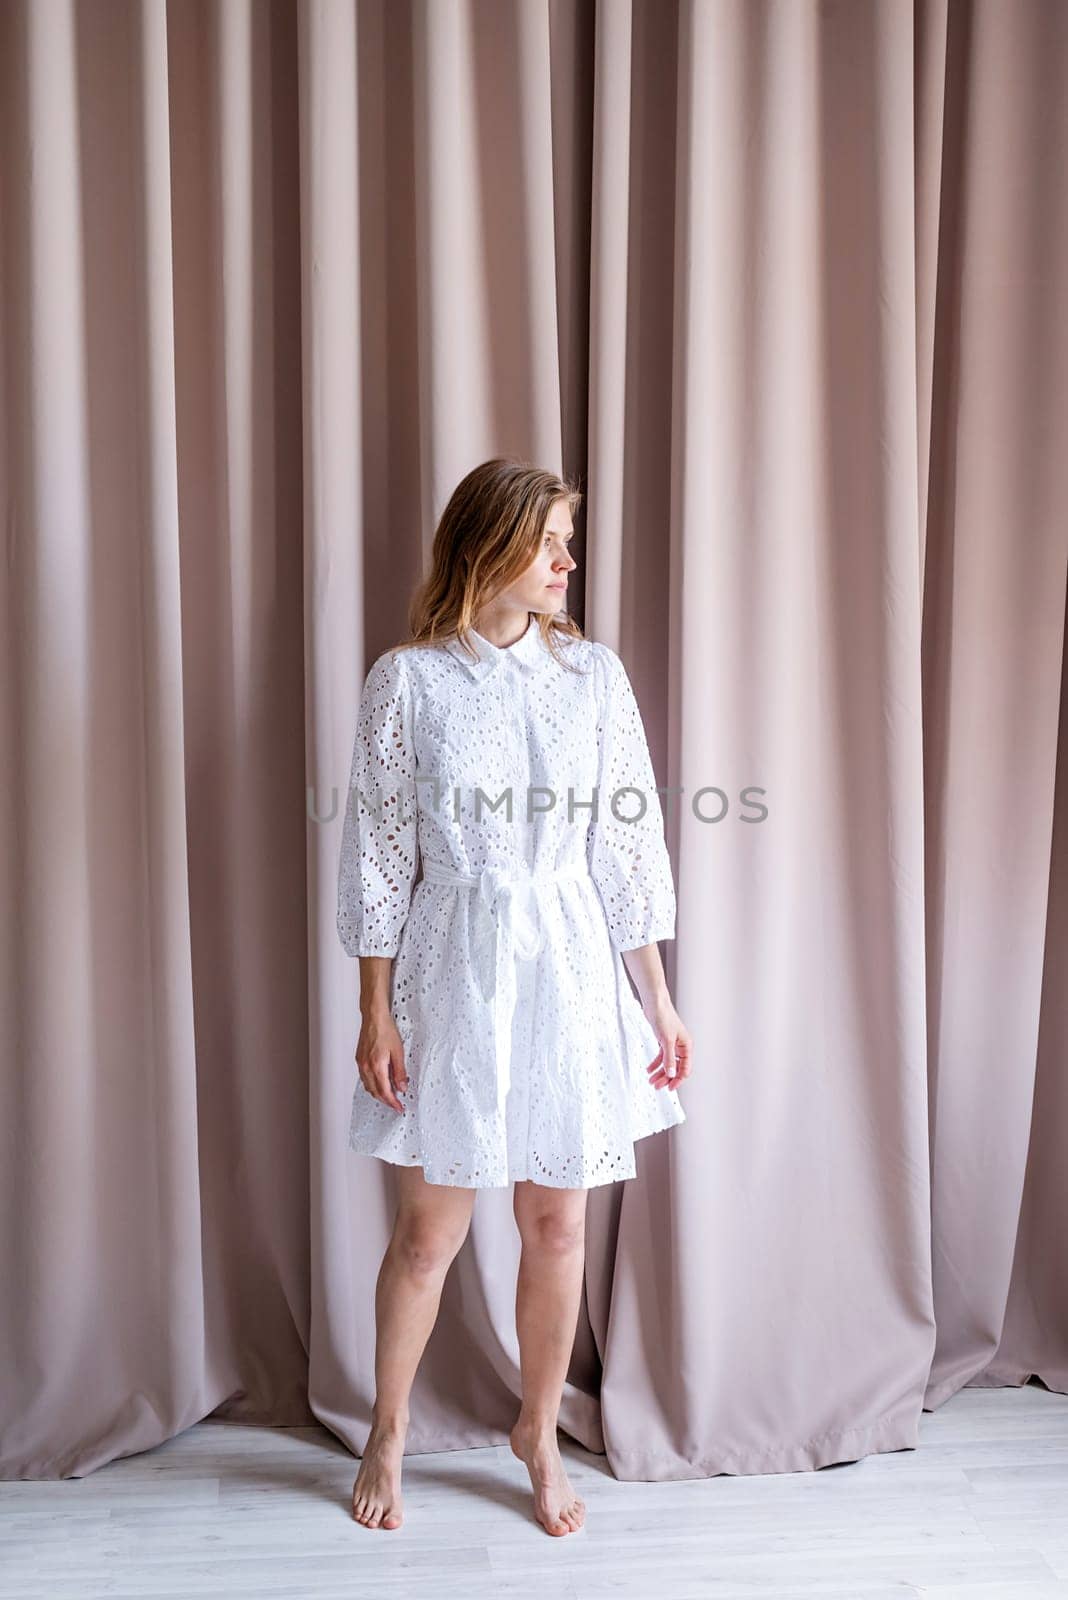 Beautiful woman in fashion dress standing barefoot on beige curtain background by Desperada